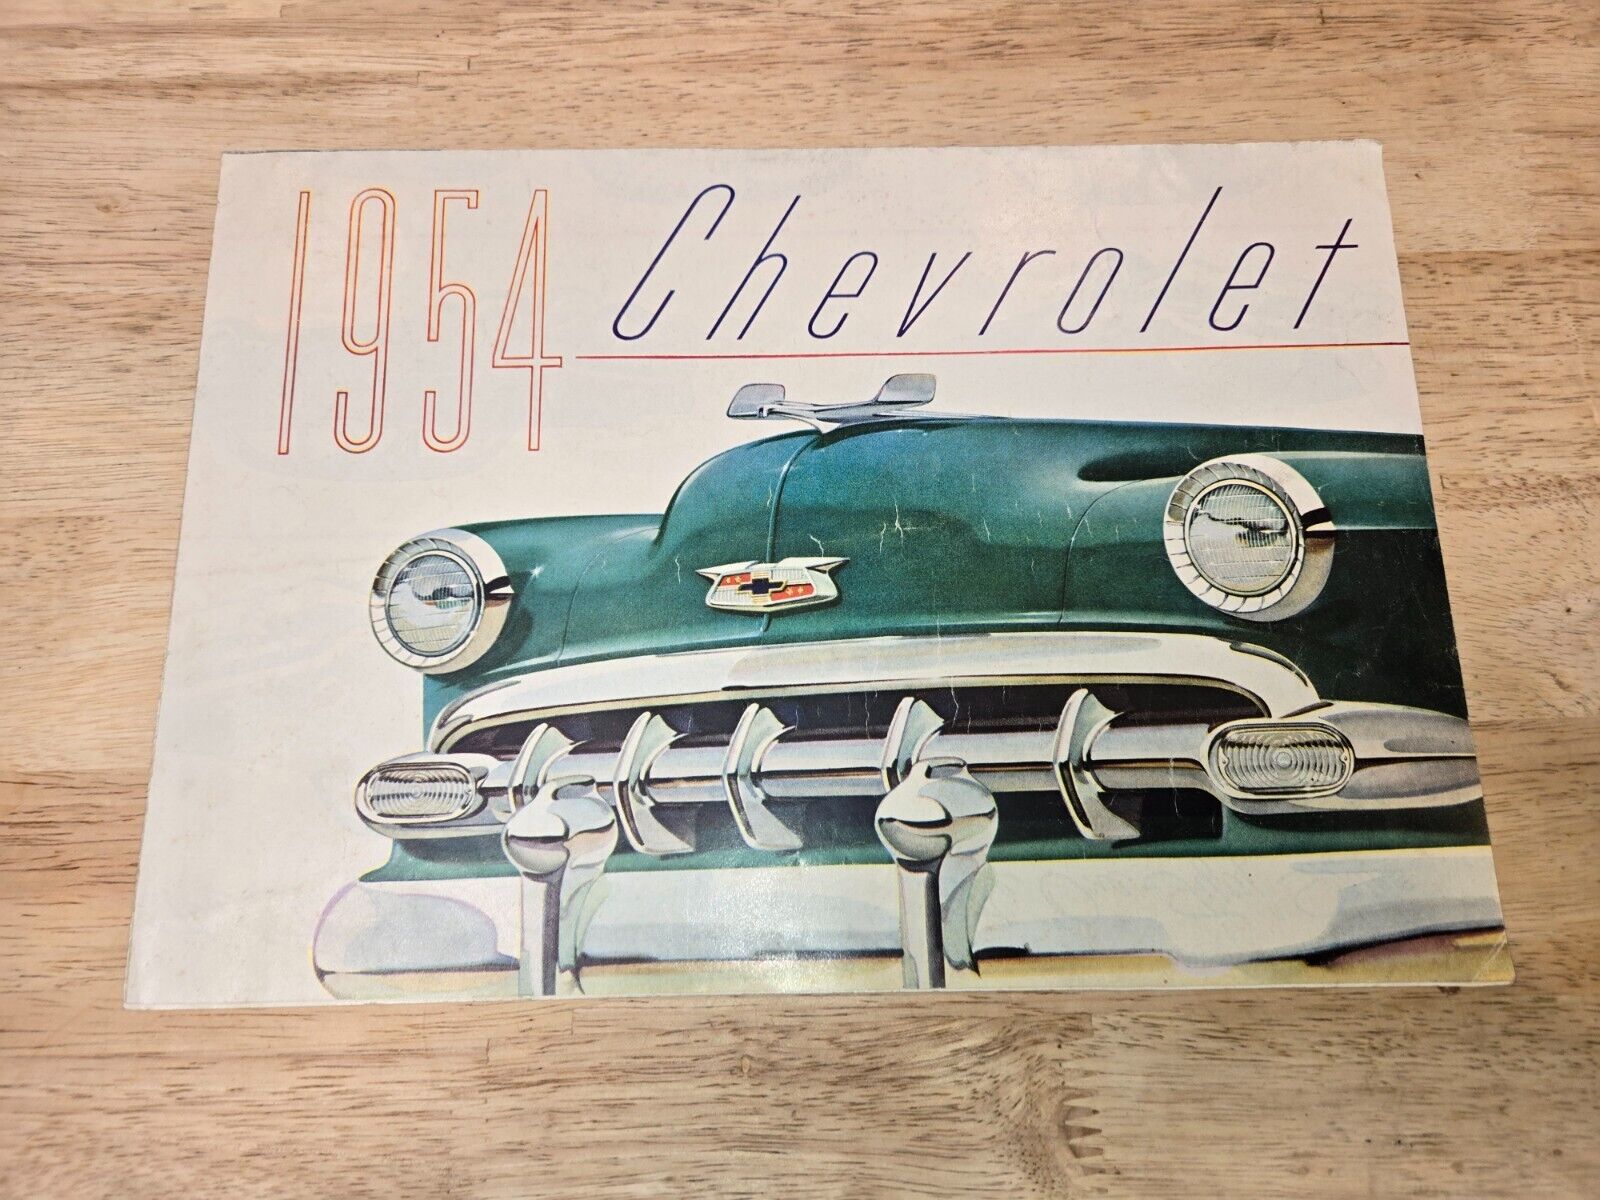 1954 CHEVROLET FOLD OUT BROCHURE WALL OF CARS ONE CORNER TEAR